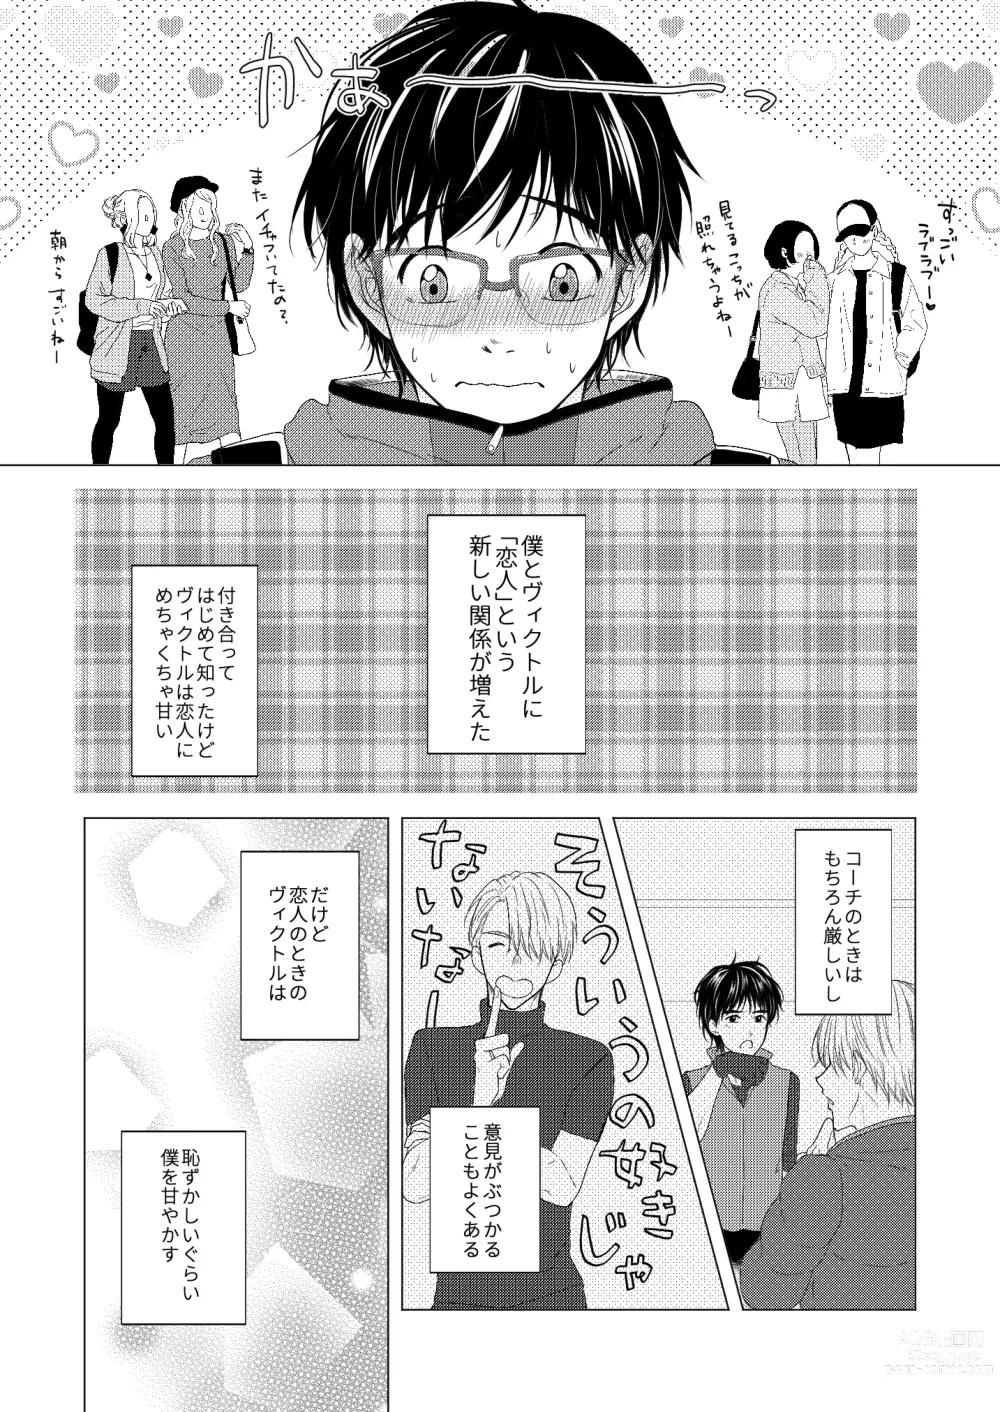 Page 29 of doujinshi Perfect two